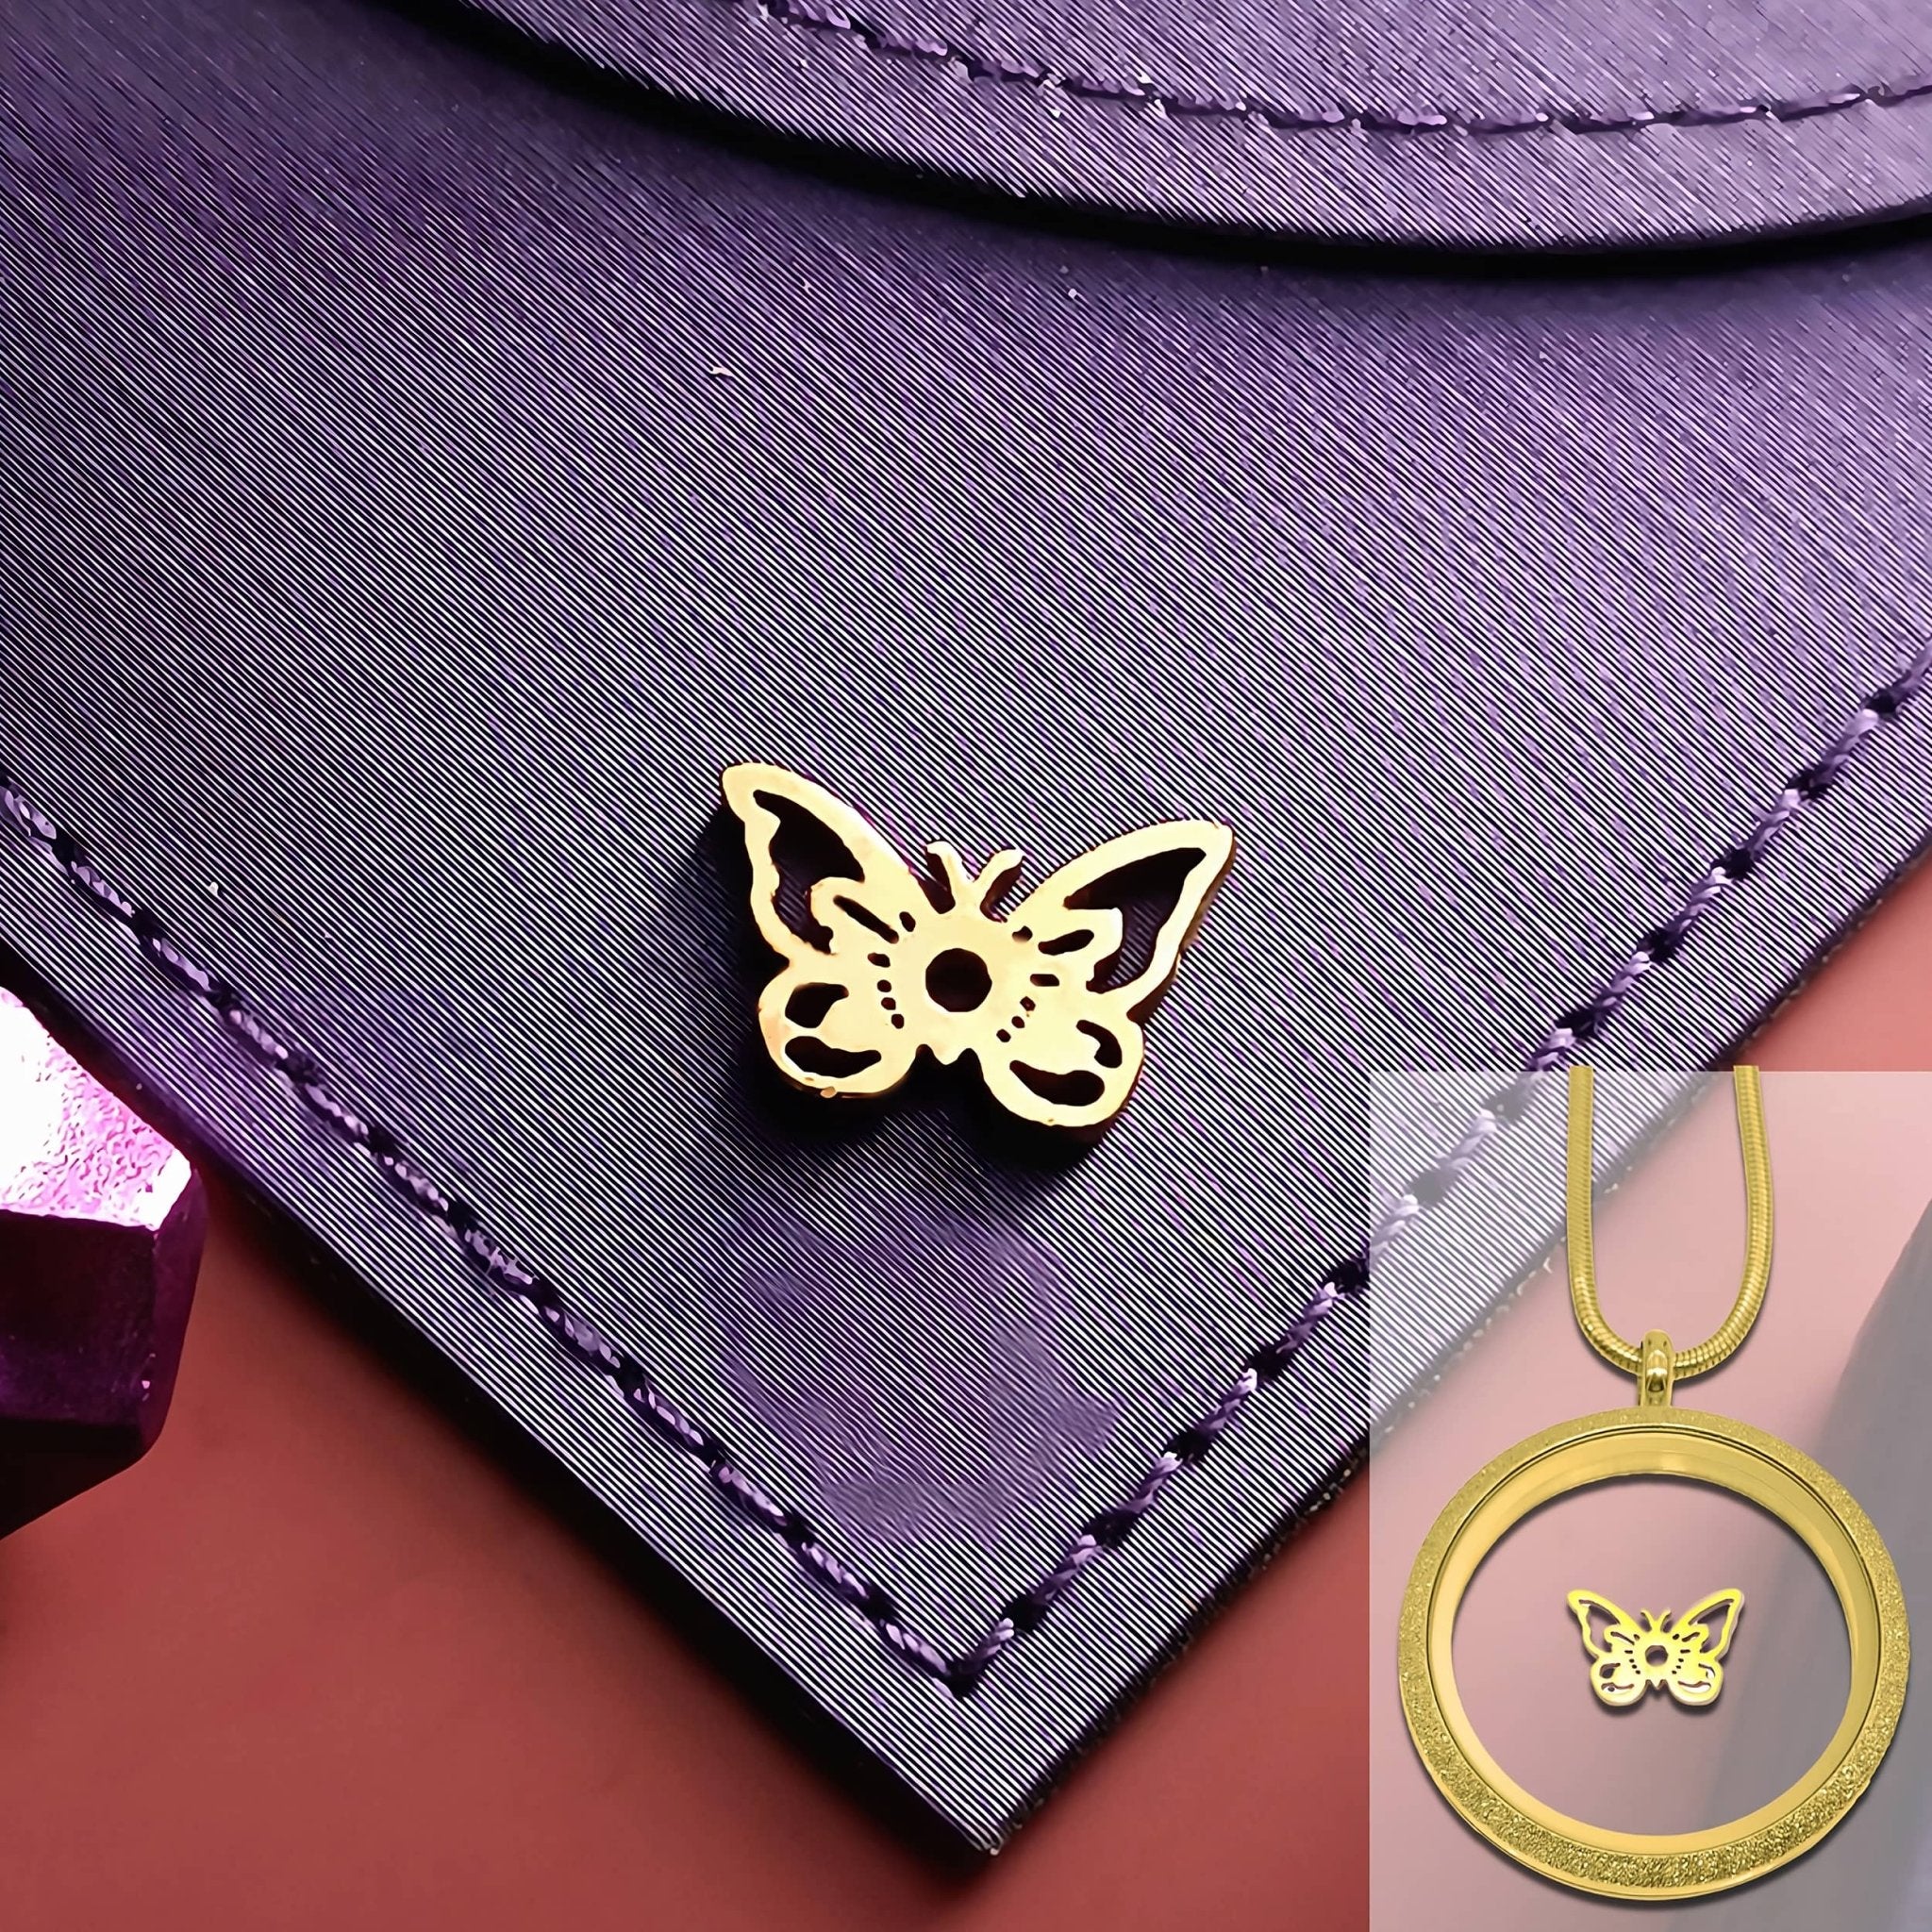 Butterfly Charm for Dream Locket - Floating Dream Lockets by Belle Fever